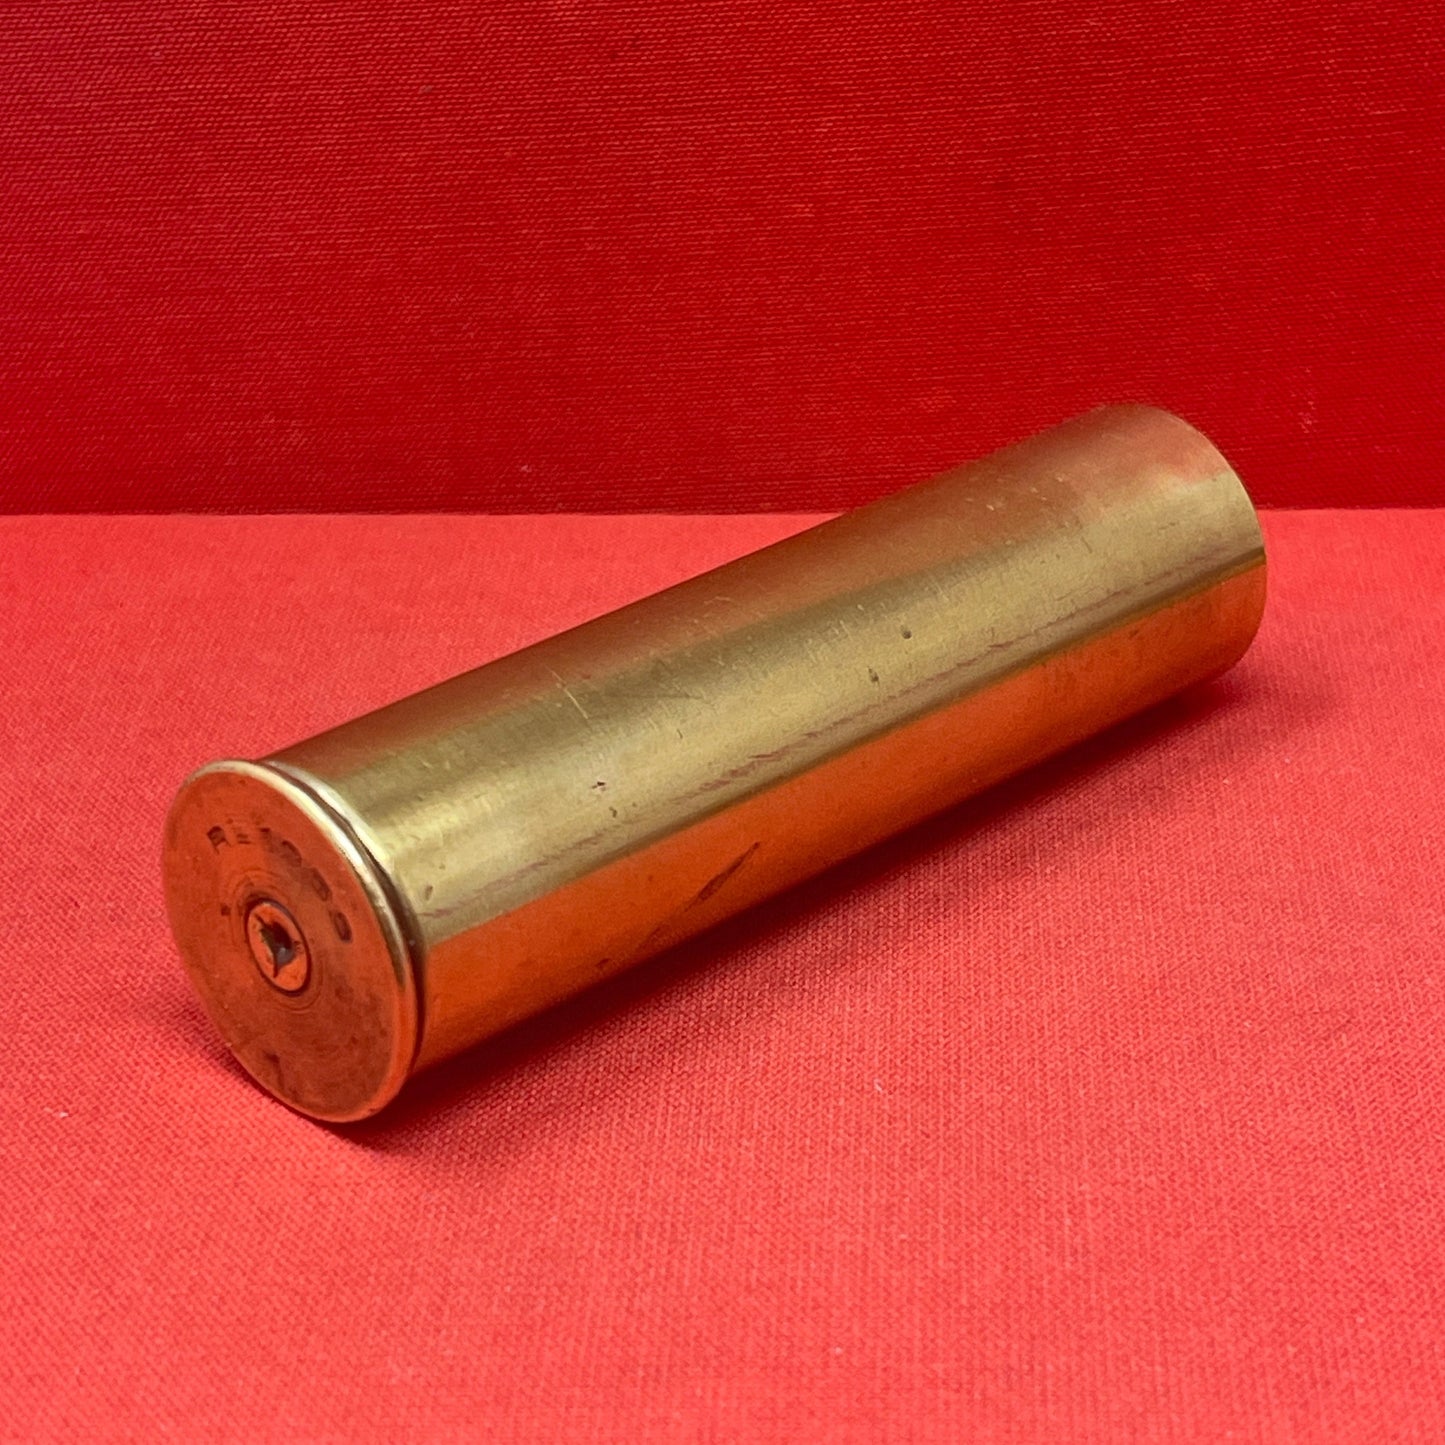 French 25mm flare Brass Cartridge case made by Ruggieri.